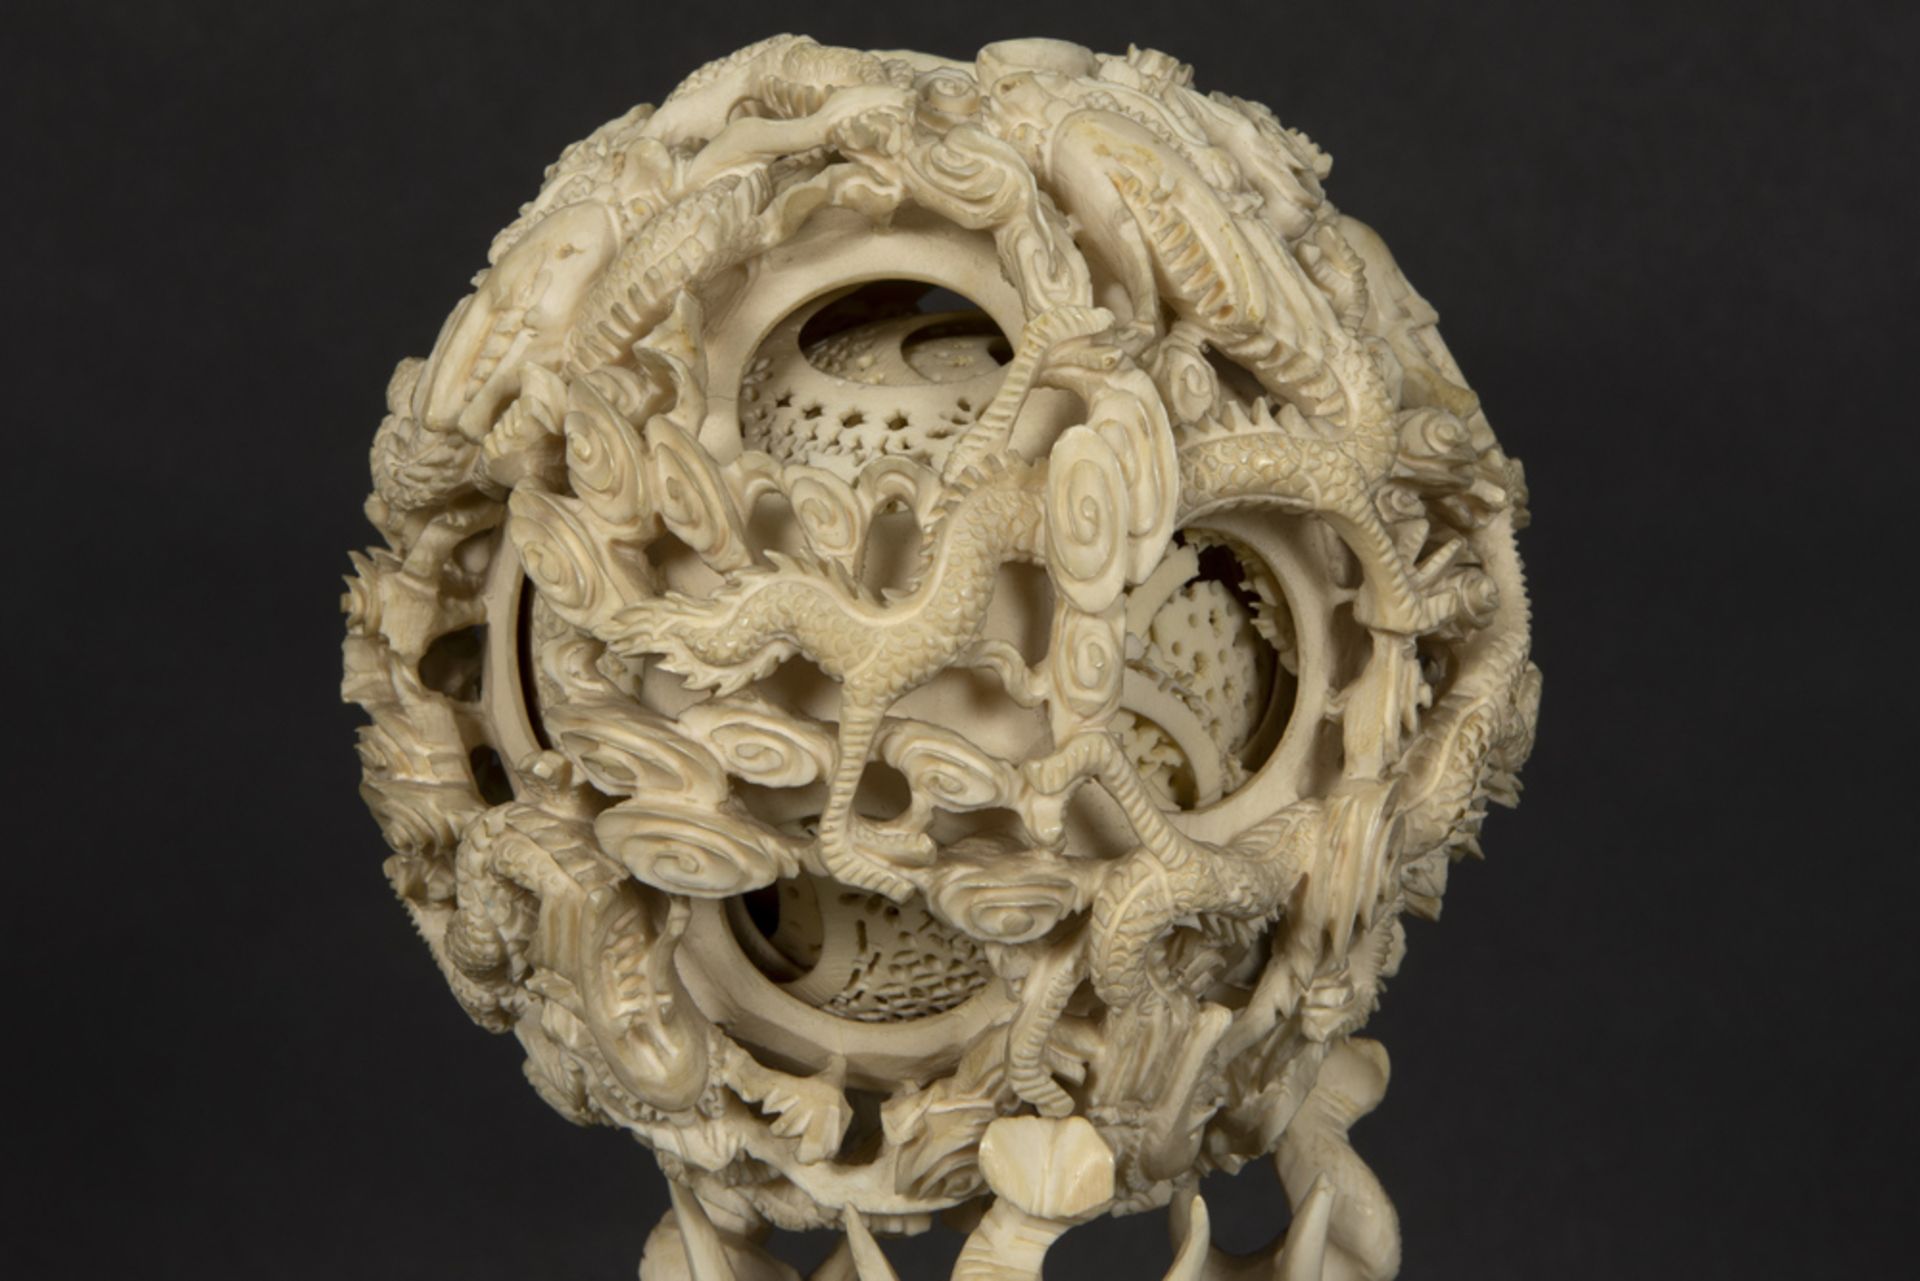 19th Cent. Chinese Qing period "Canton Ball" on a stand with elephants - typical fine Cantonese work - Bild 3 aus 5